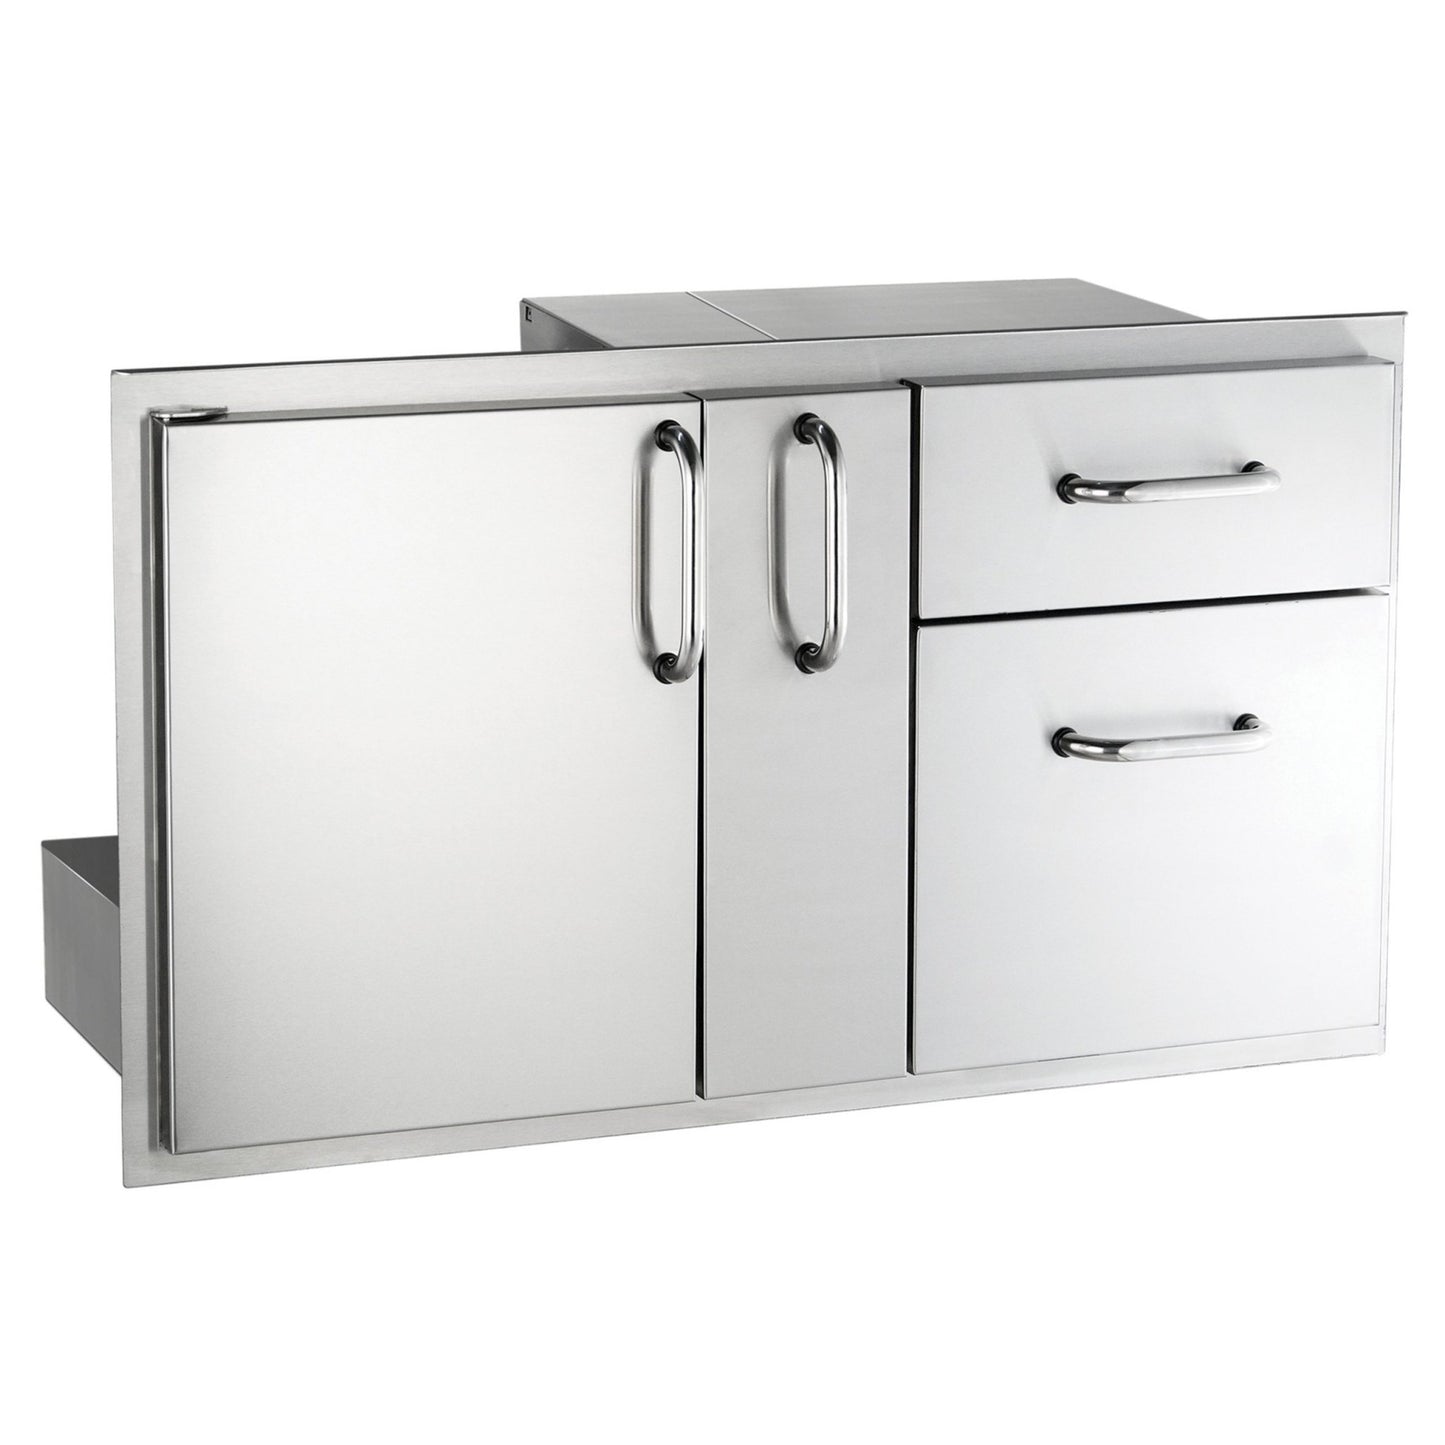 Fire Magic 33816S 36-Inch Select Access Door w/ Platter Storage and Double Drawer - grillsNmore.com